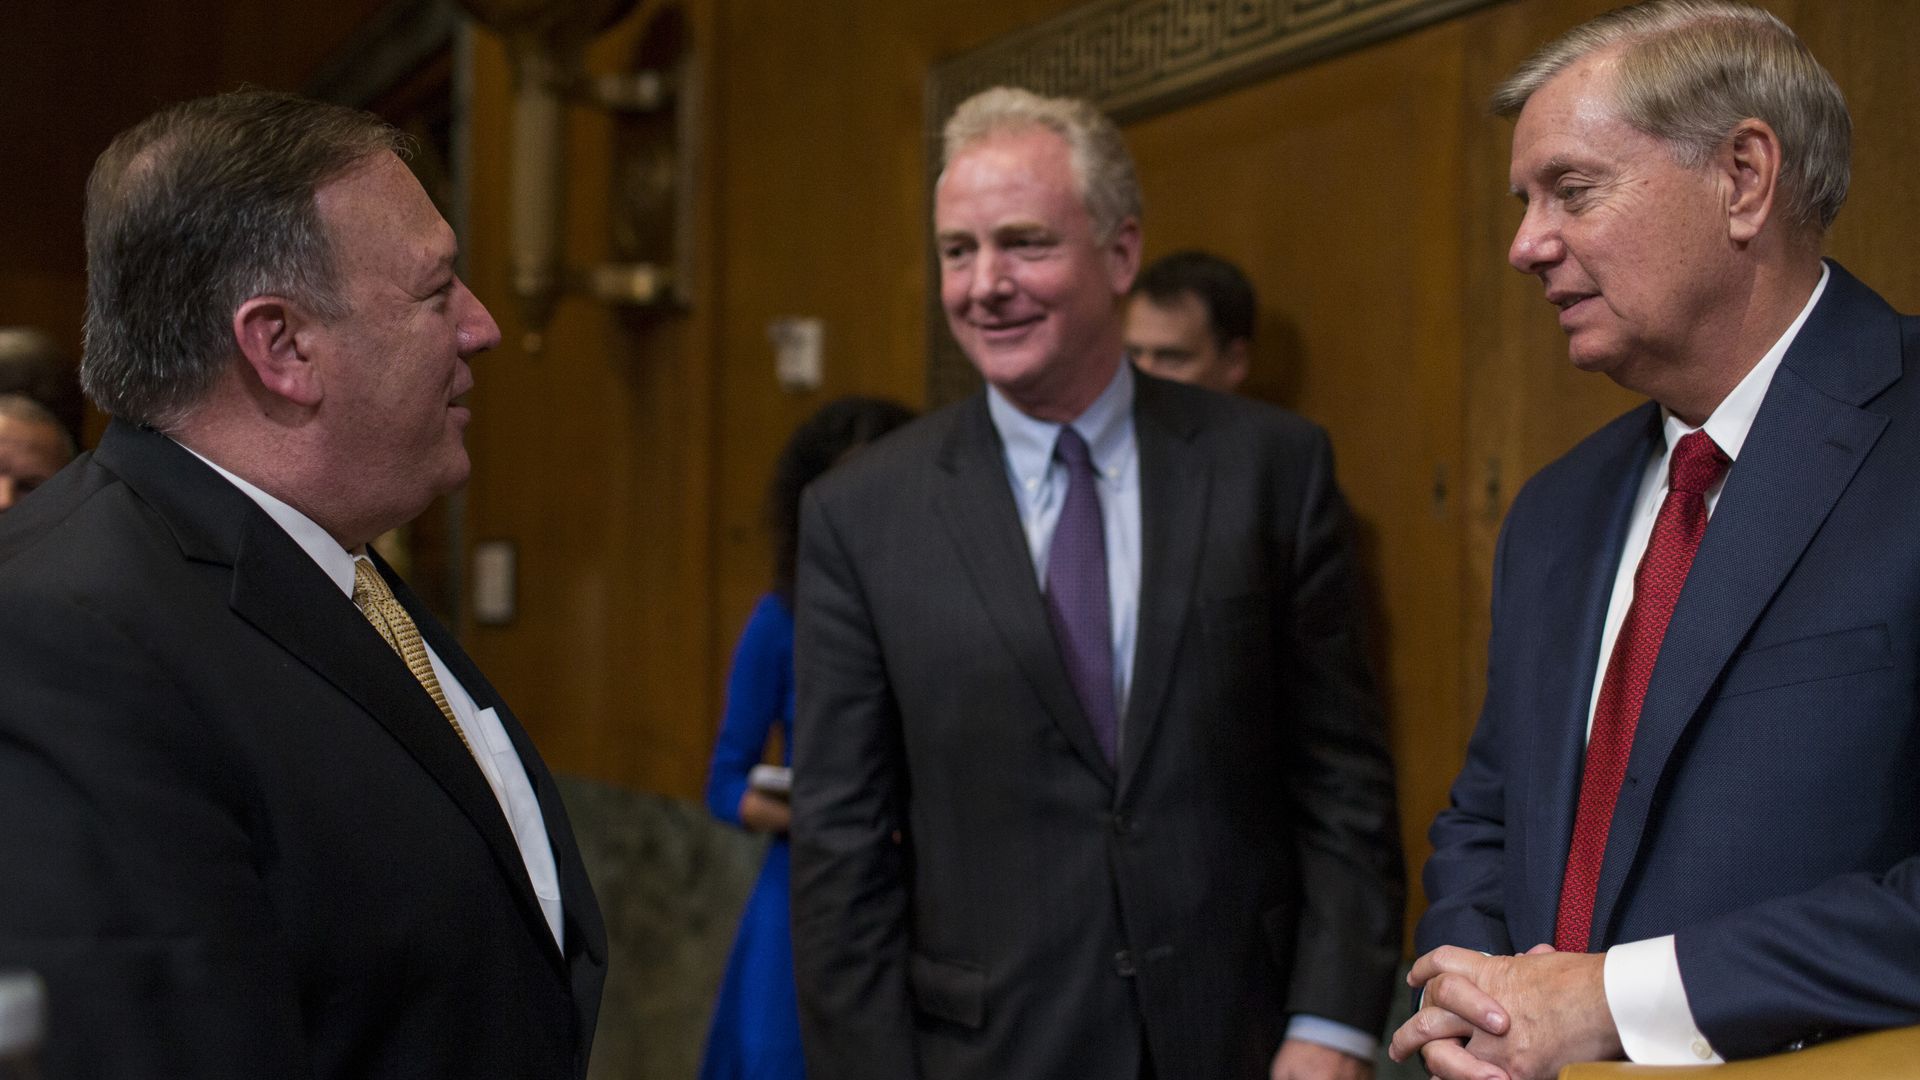 In this image, Graham and Van Hollen speak with Mike Pompeo. All are wearing suits and standing in front of a wooden panel wall